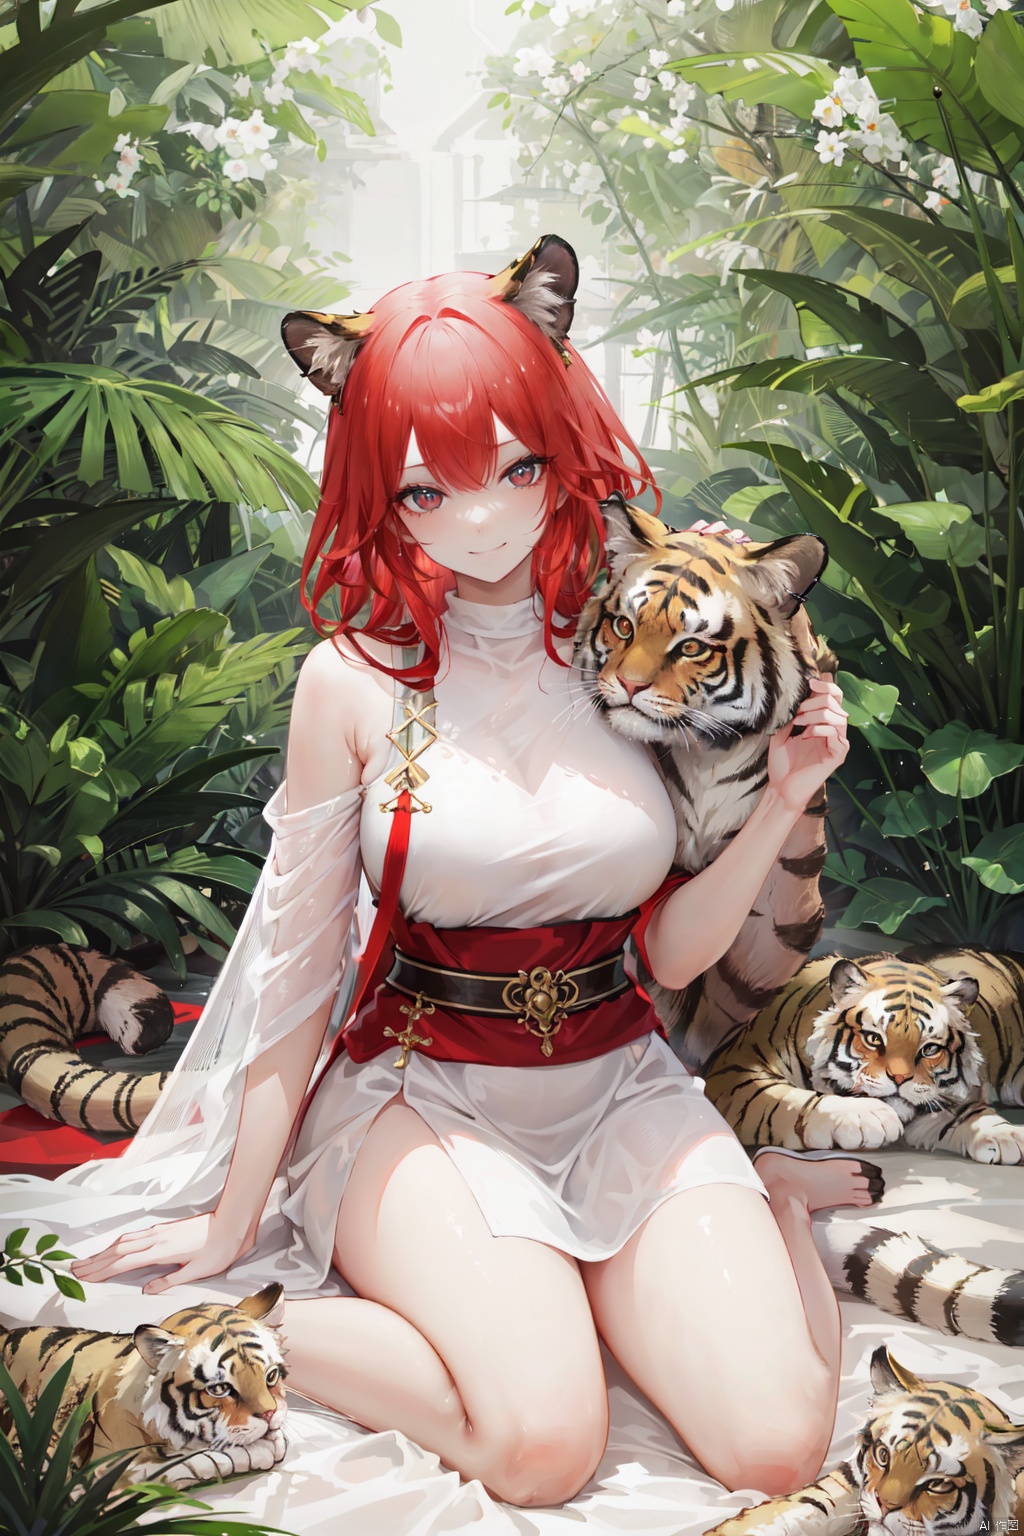 oil painting style, best quality, detailed face, full figure, a half-hybrid girl with a tiger, she has ears like a tiger and a tail like a tiger , the rest of her body is human, she has beautiful red hair, a beautiful symmetrical face with an innocent cut, she is in the forest, she has beautiful black eyes, wearing a floral print white saree dress, she is with other animals symmetrical, vibrant, style artwork, highly detailed CG, 8k wallpaper, beautiful face, full scene, full body shape